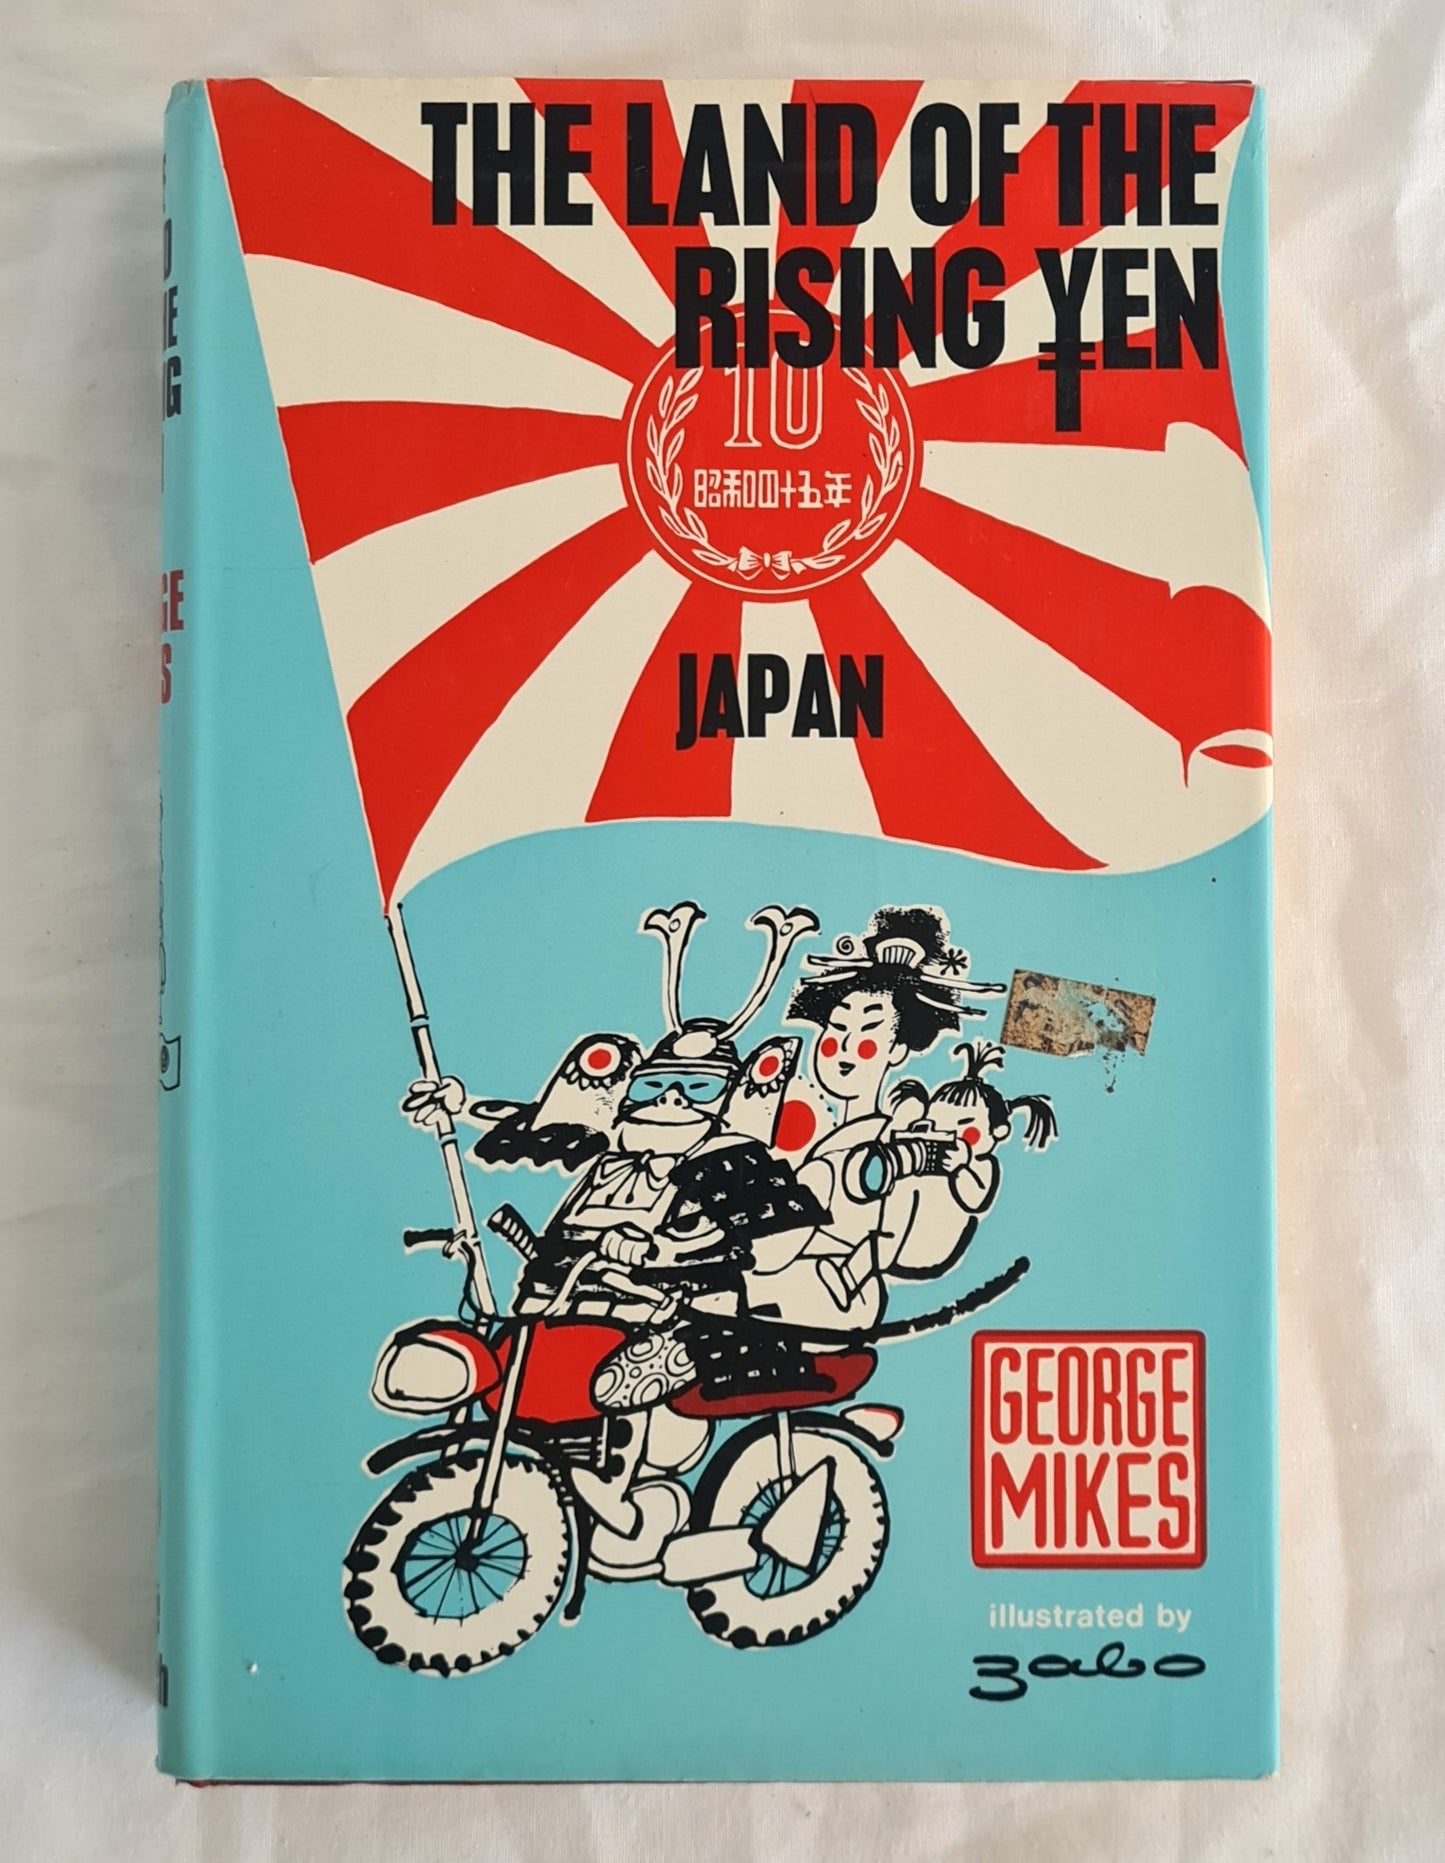 The Land of the Rising Yen  Japan  by George Mikes  Illustrated by Zabo